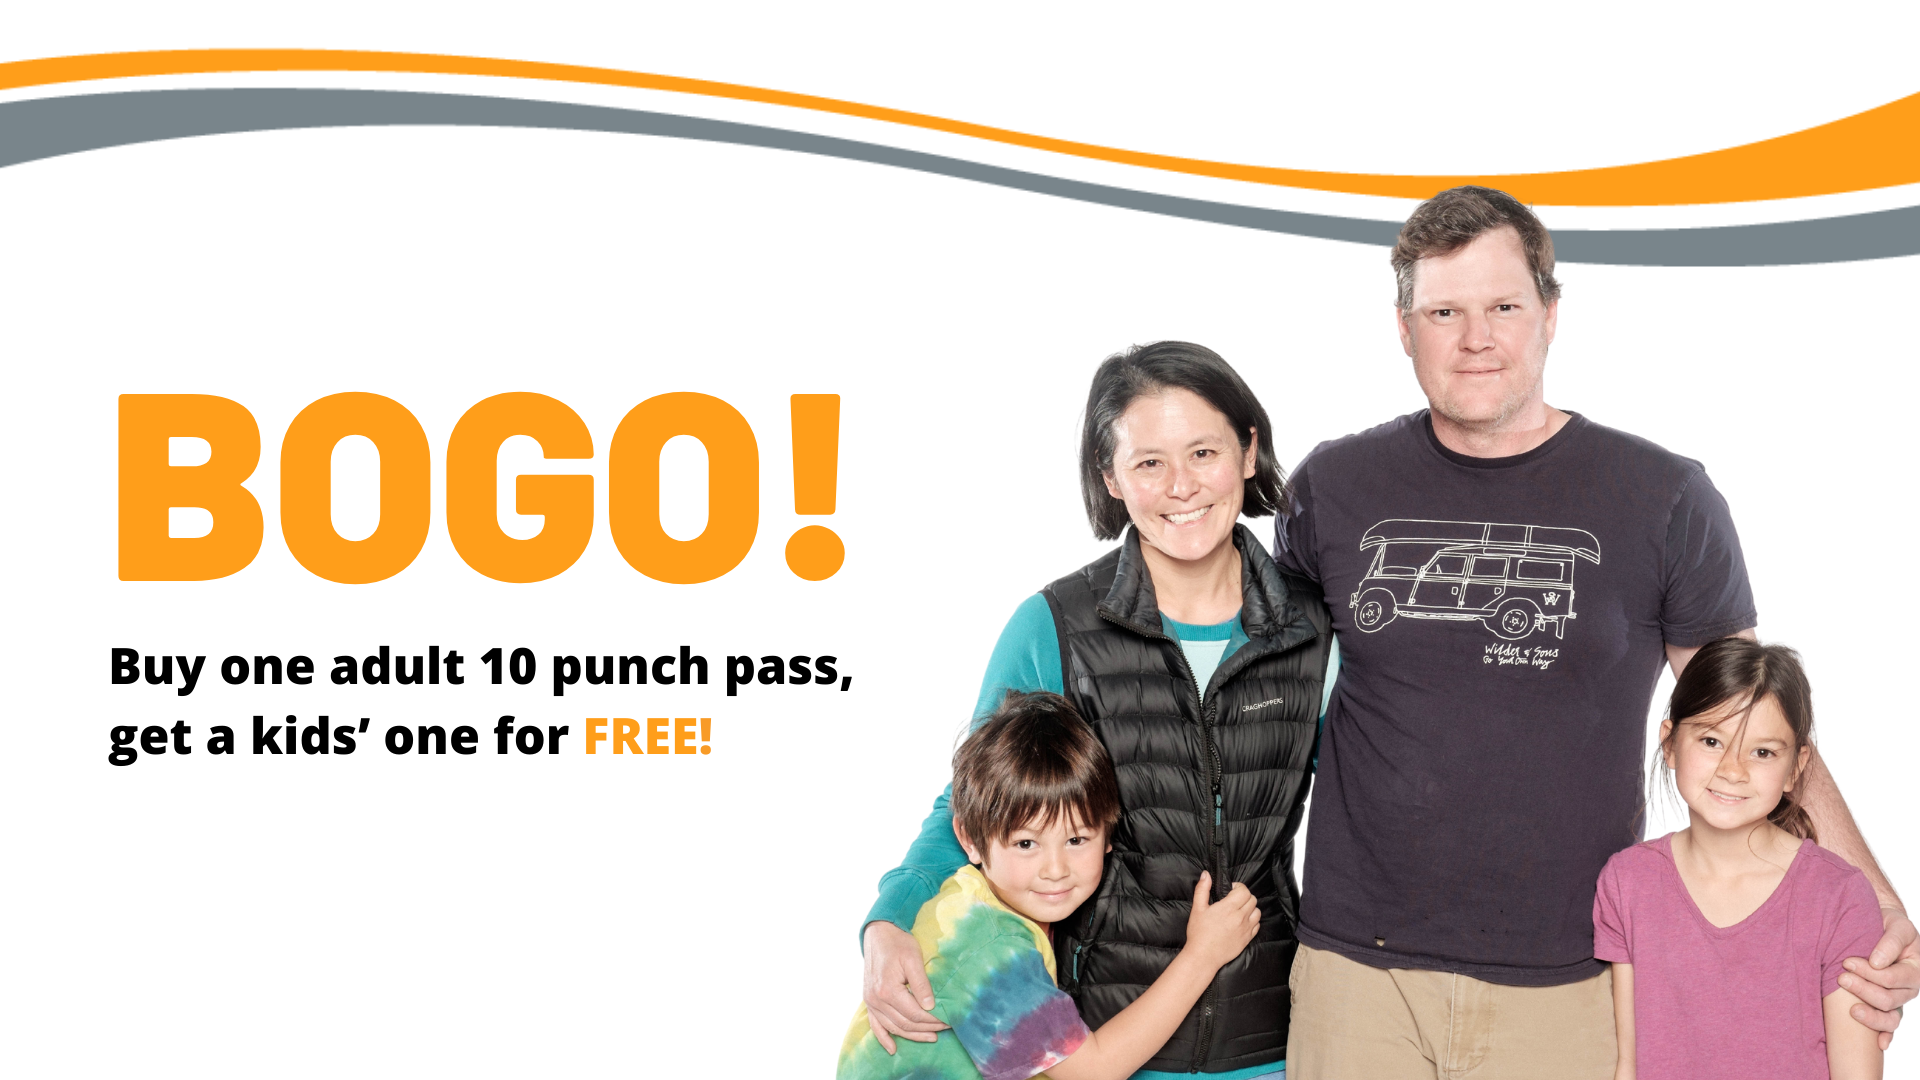 BOGO! Buy an adult 10 punch pass, get a kids pass for FREE!